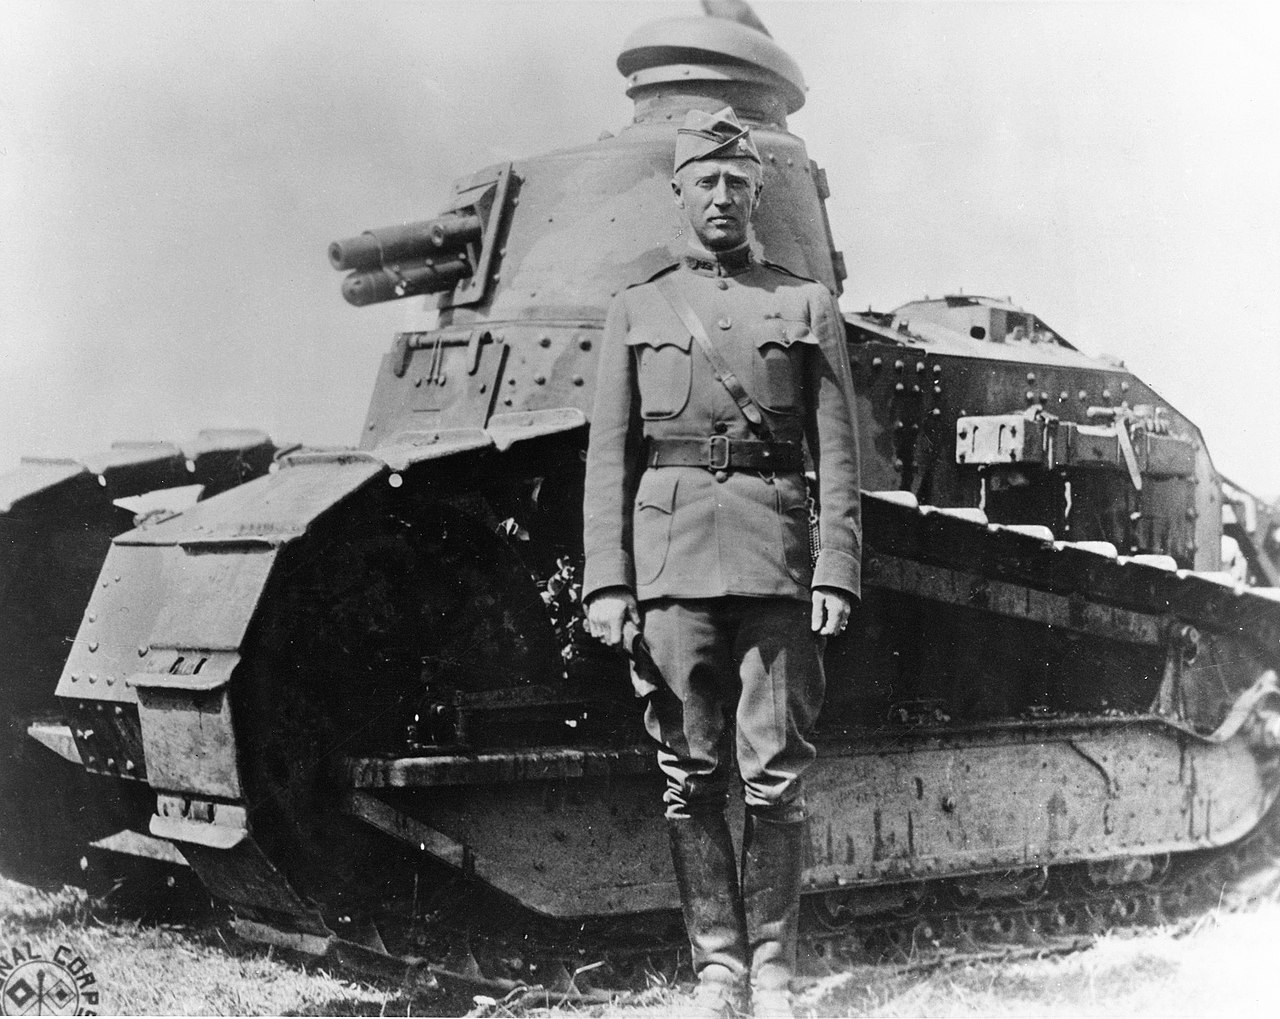 America named four tanks after General George S. Patton